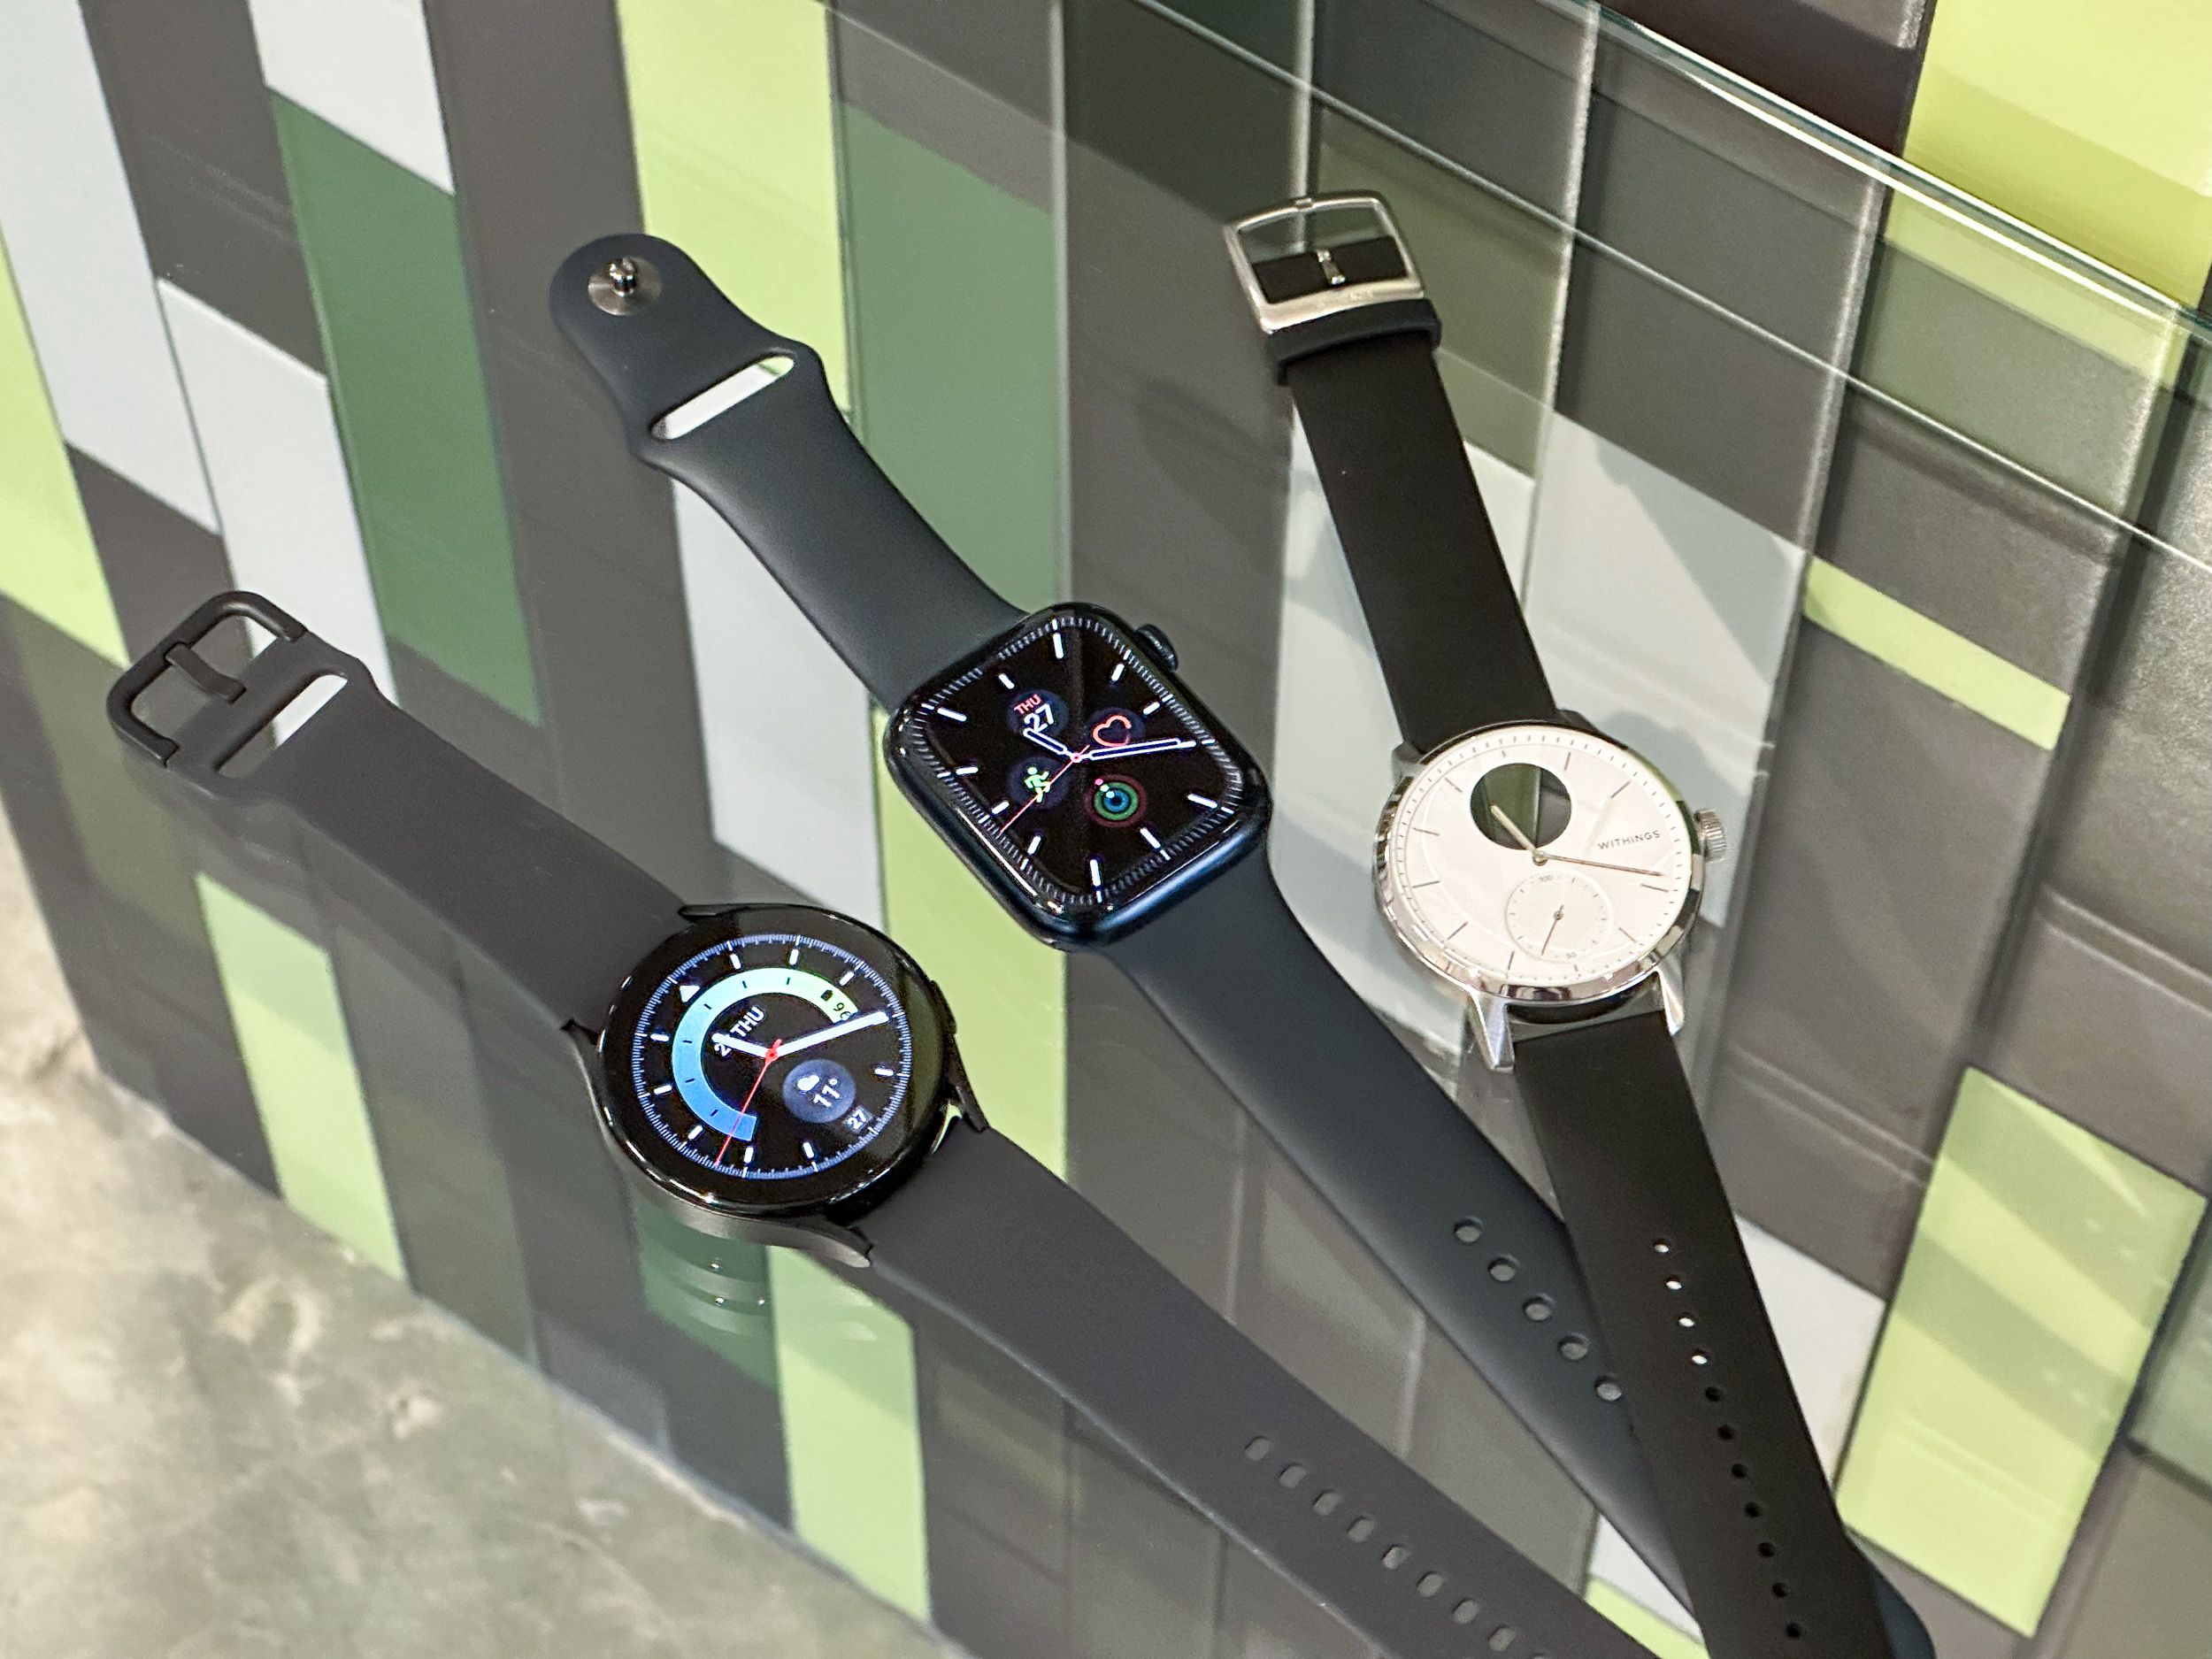 Top 10 Upcoming Smartwatches in March 2022